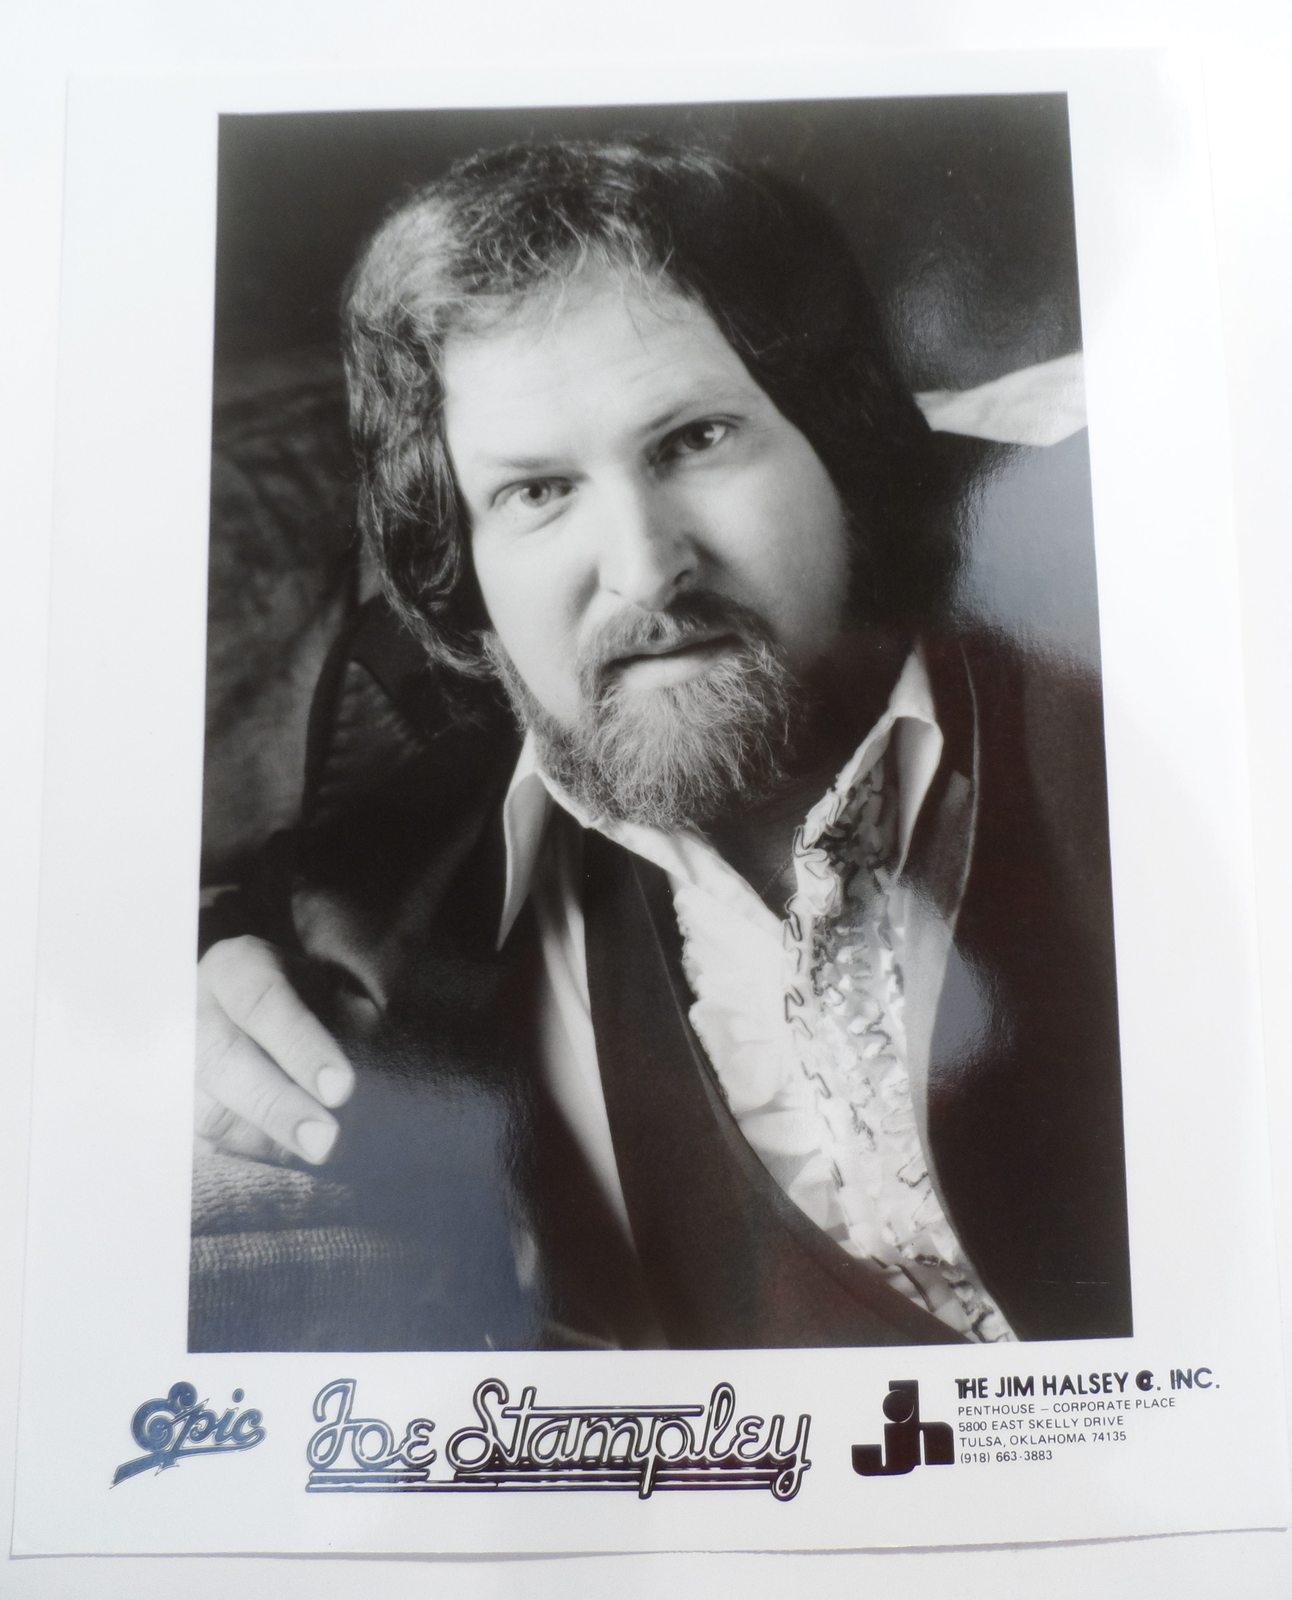 Primary image for JOE STAMPLEY Promo Photo 8*10 Country Rare 1980's Epic Records Jim Halsey Inc 